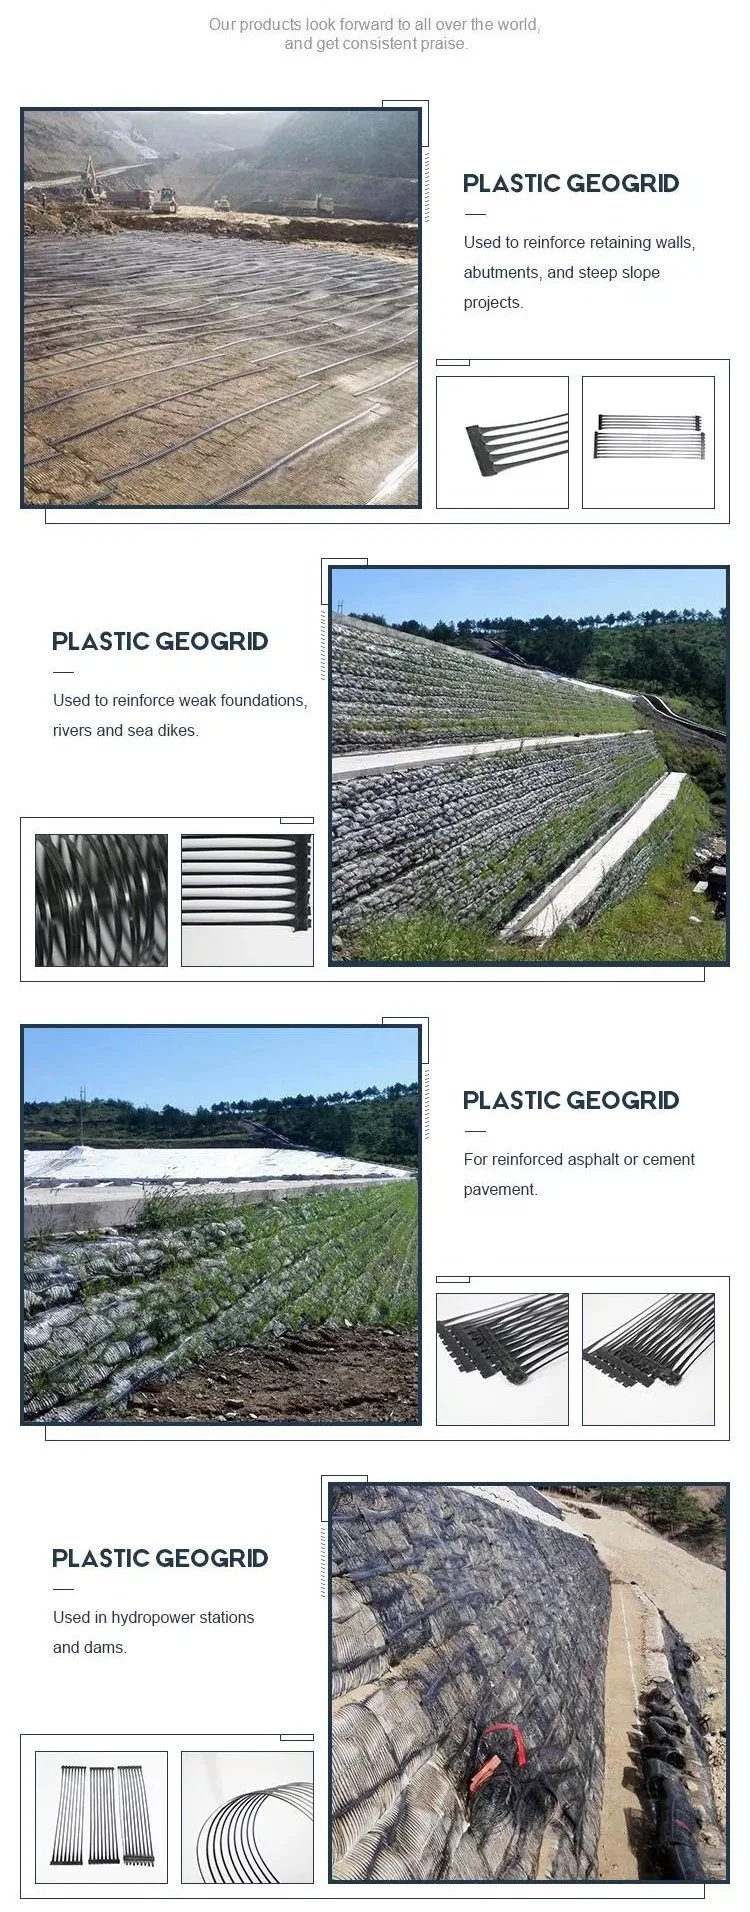 High Strength PP/HDPE Uniaxial Plastic Geogrid for Retaining Wall Reinforcement